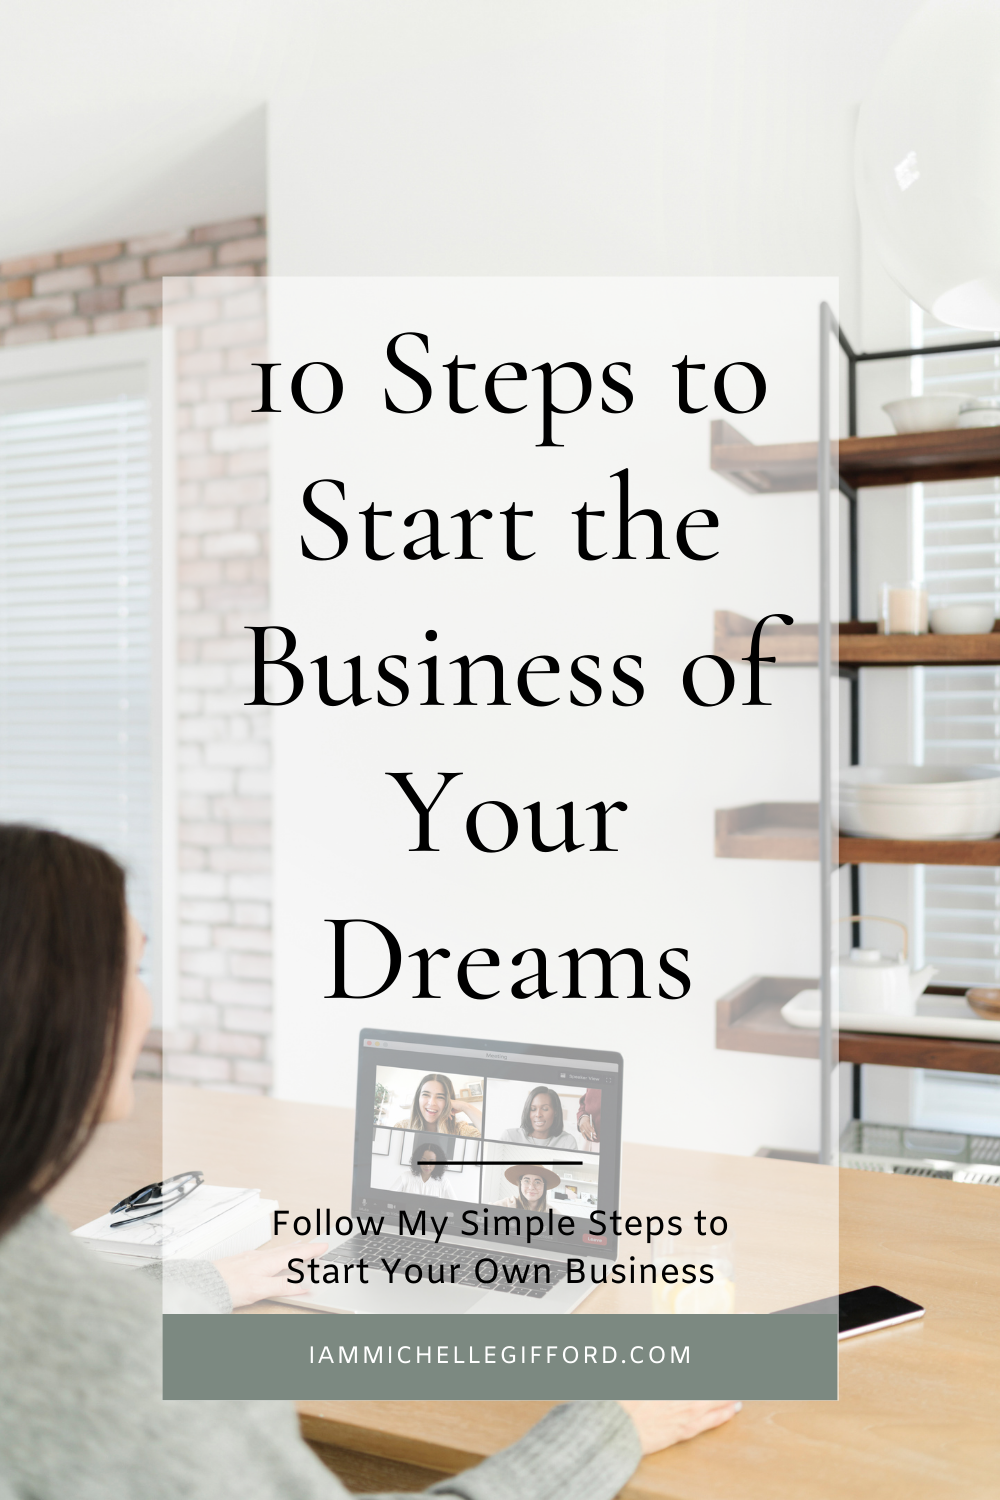 10 Simple Steps for Starting the Business of your Dreams. www.iammichellegifford.com